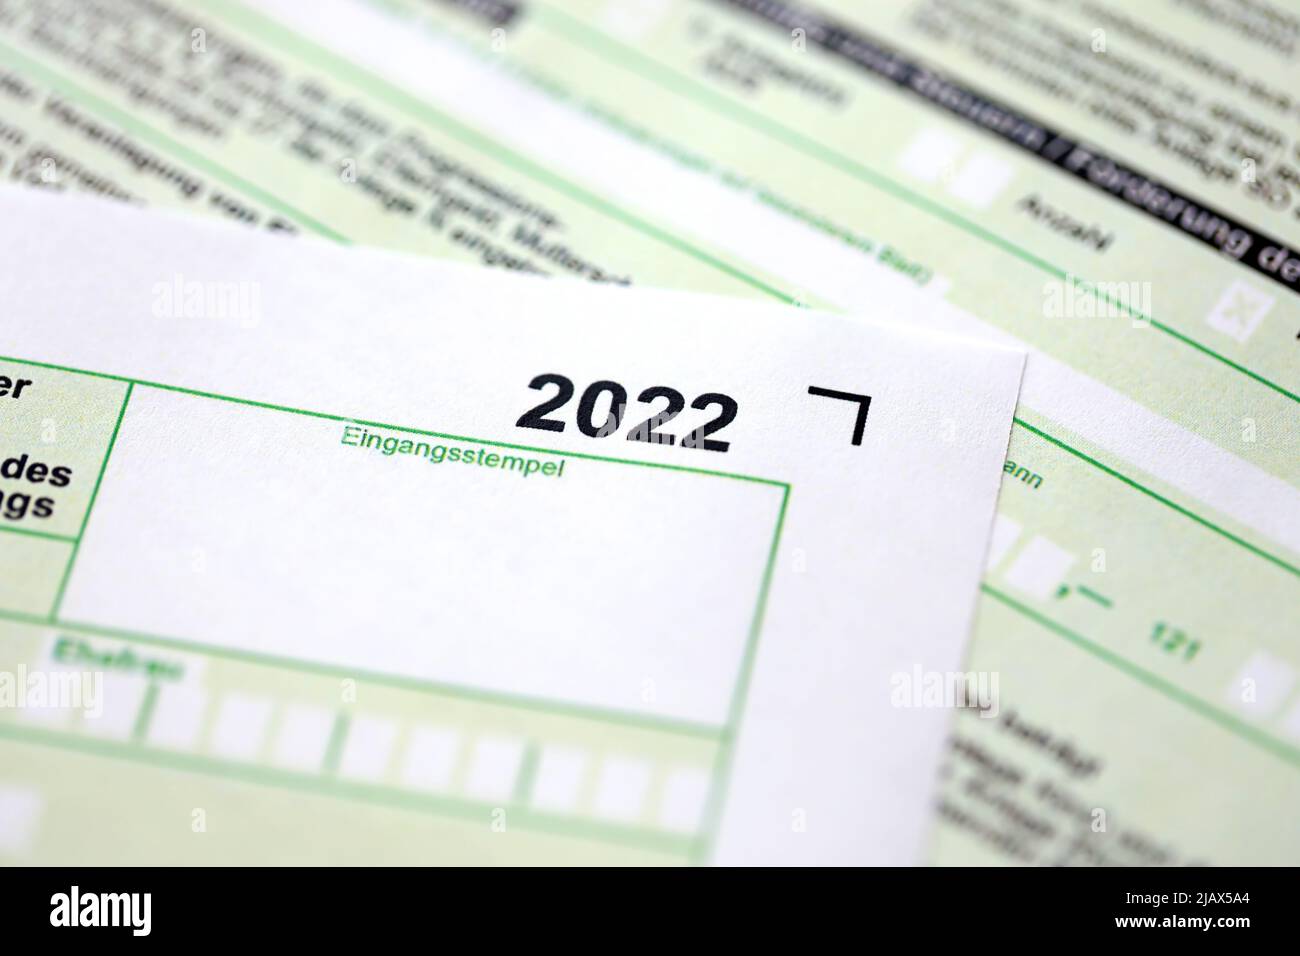 german-annual-income-tax-return-declaration-form-for-2022-year-close-up